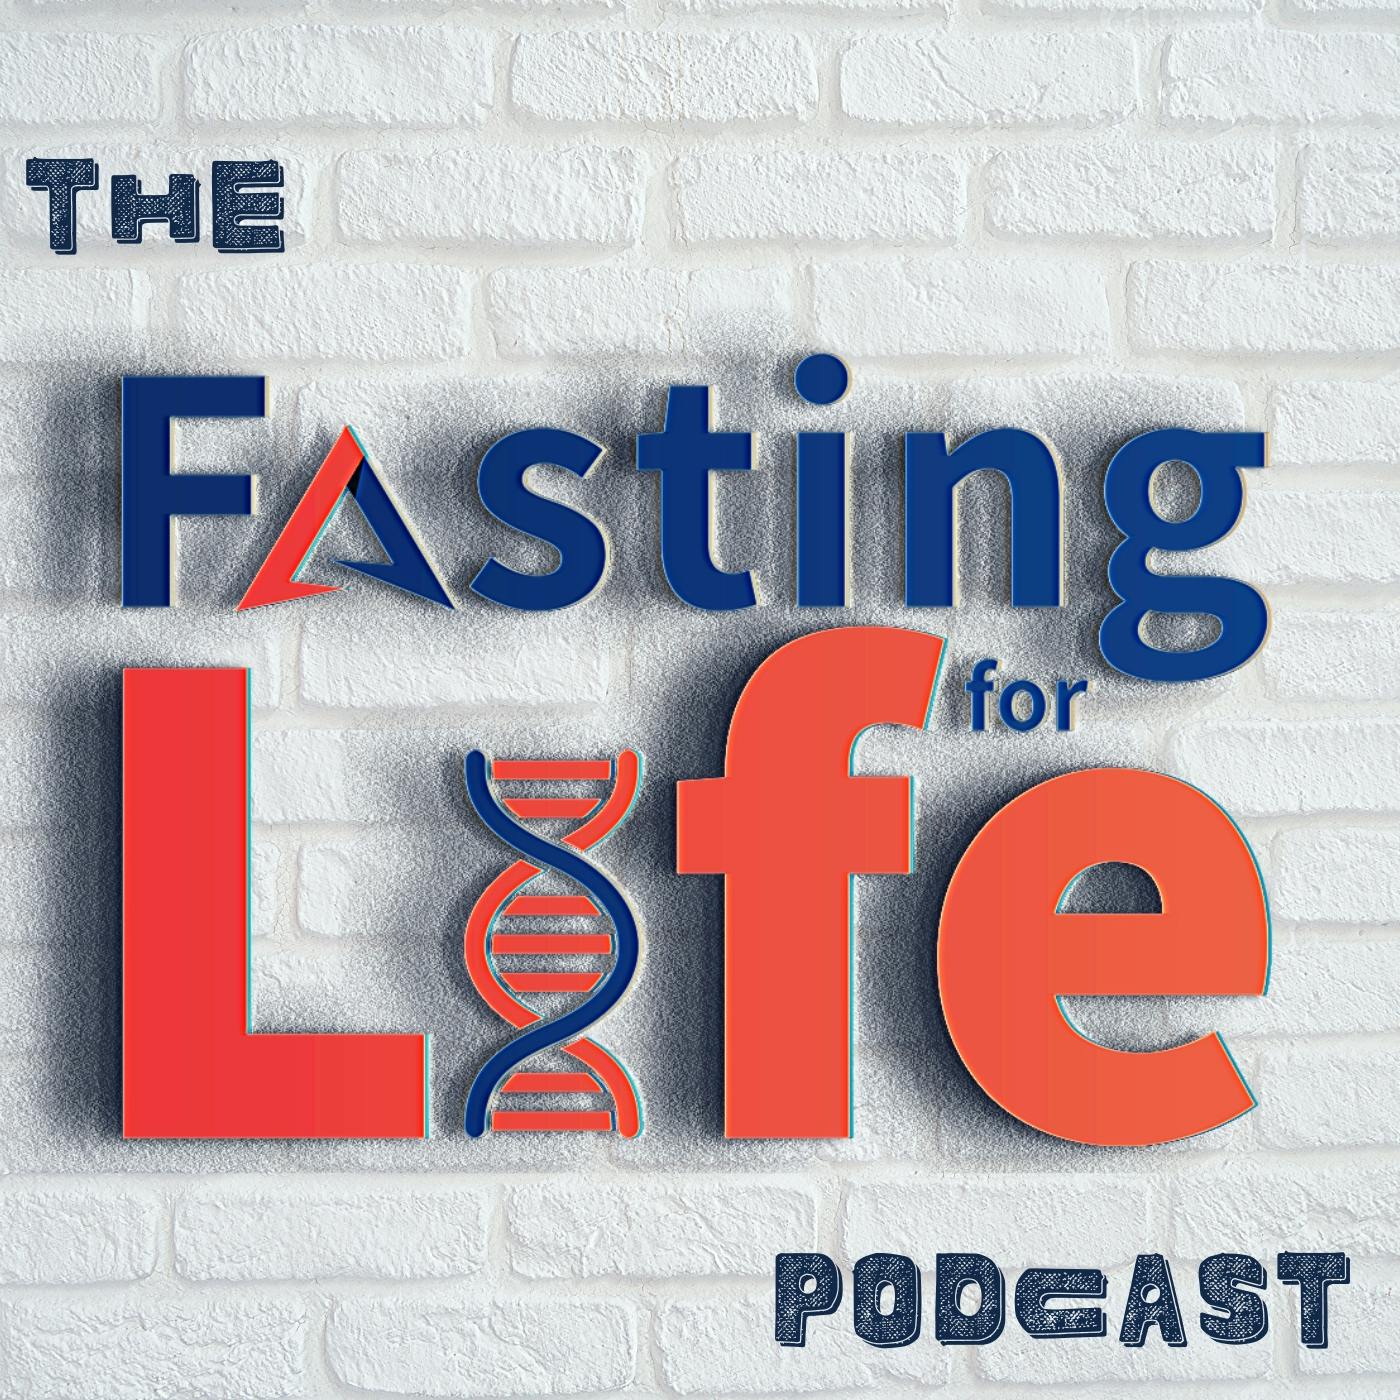 Ep. 73 - Dr. Scott's 8.5-Day Extended fast: Why now? Routines & Frustration. When to push your window? | Fat + Protein to Lower Insulin Response when Breaking a Fast | Fasting After Antibiotics | Free